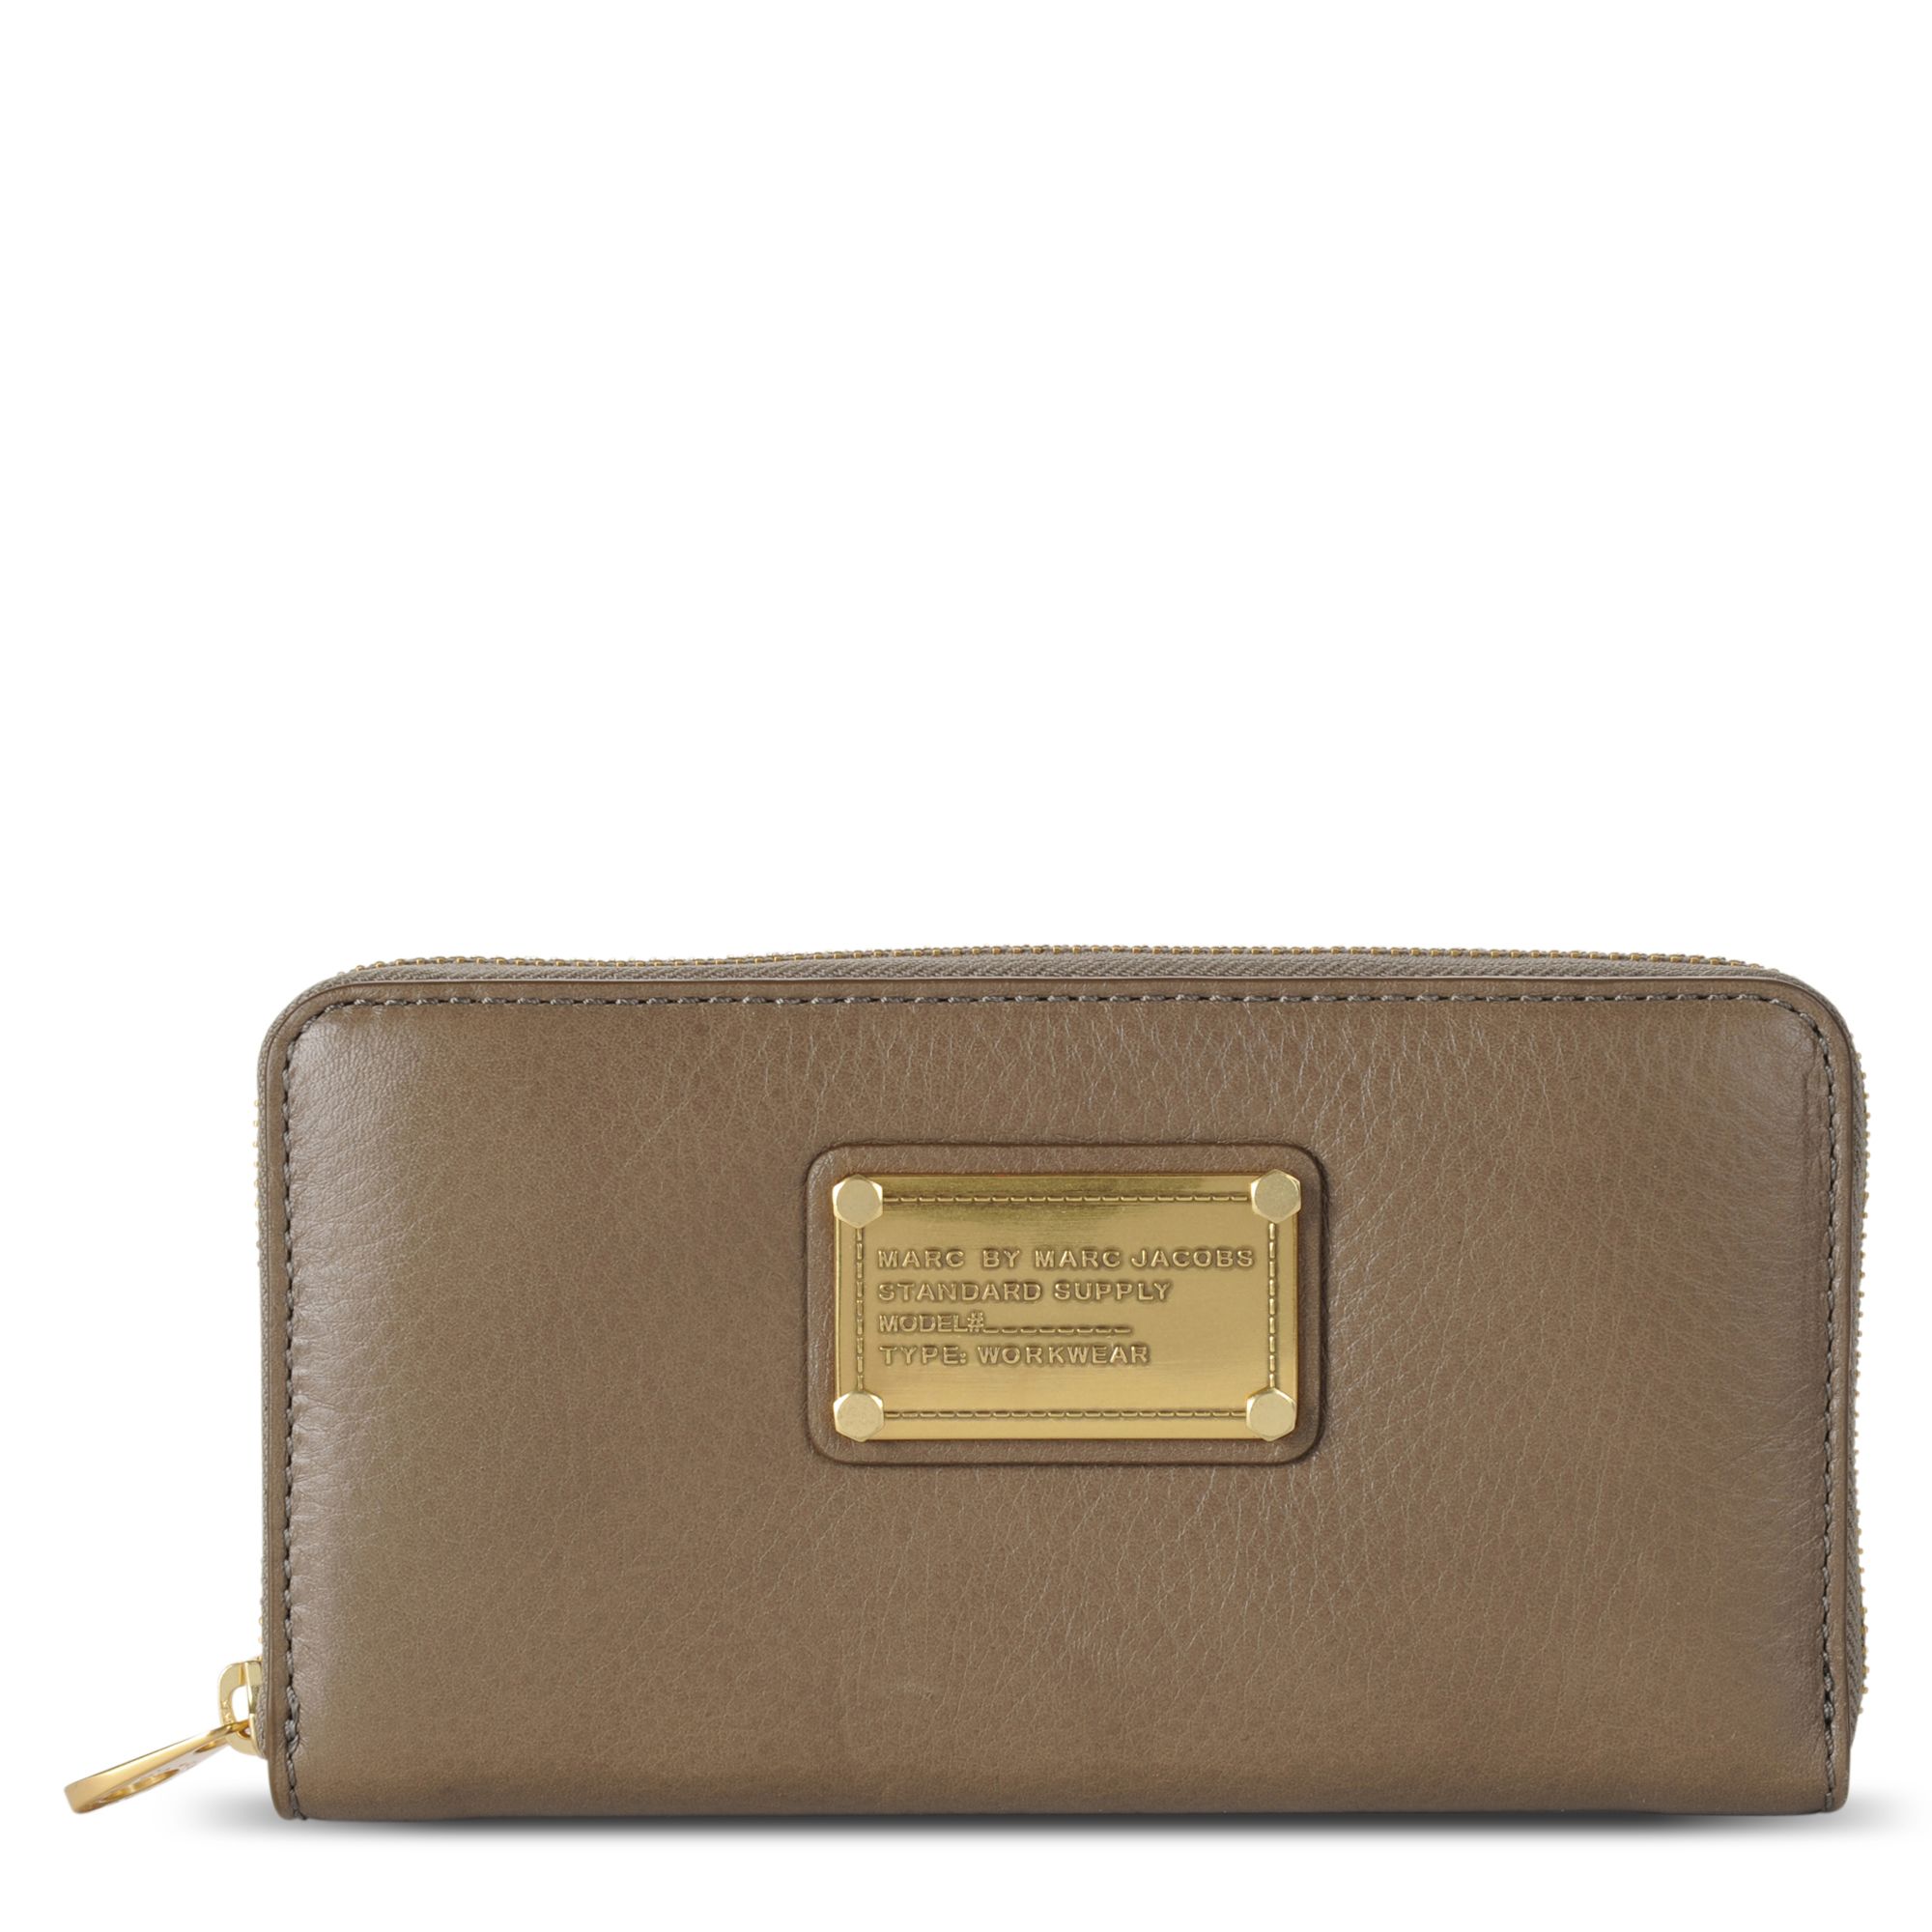 Marc By Marc Jacobs Classic Q Large Zip Around Wallet in Brown (gold